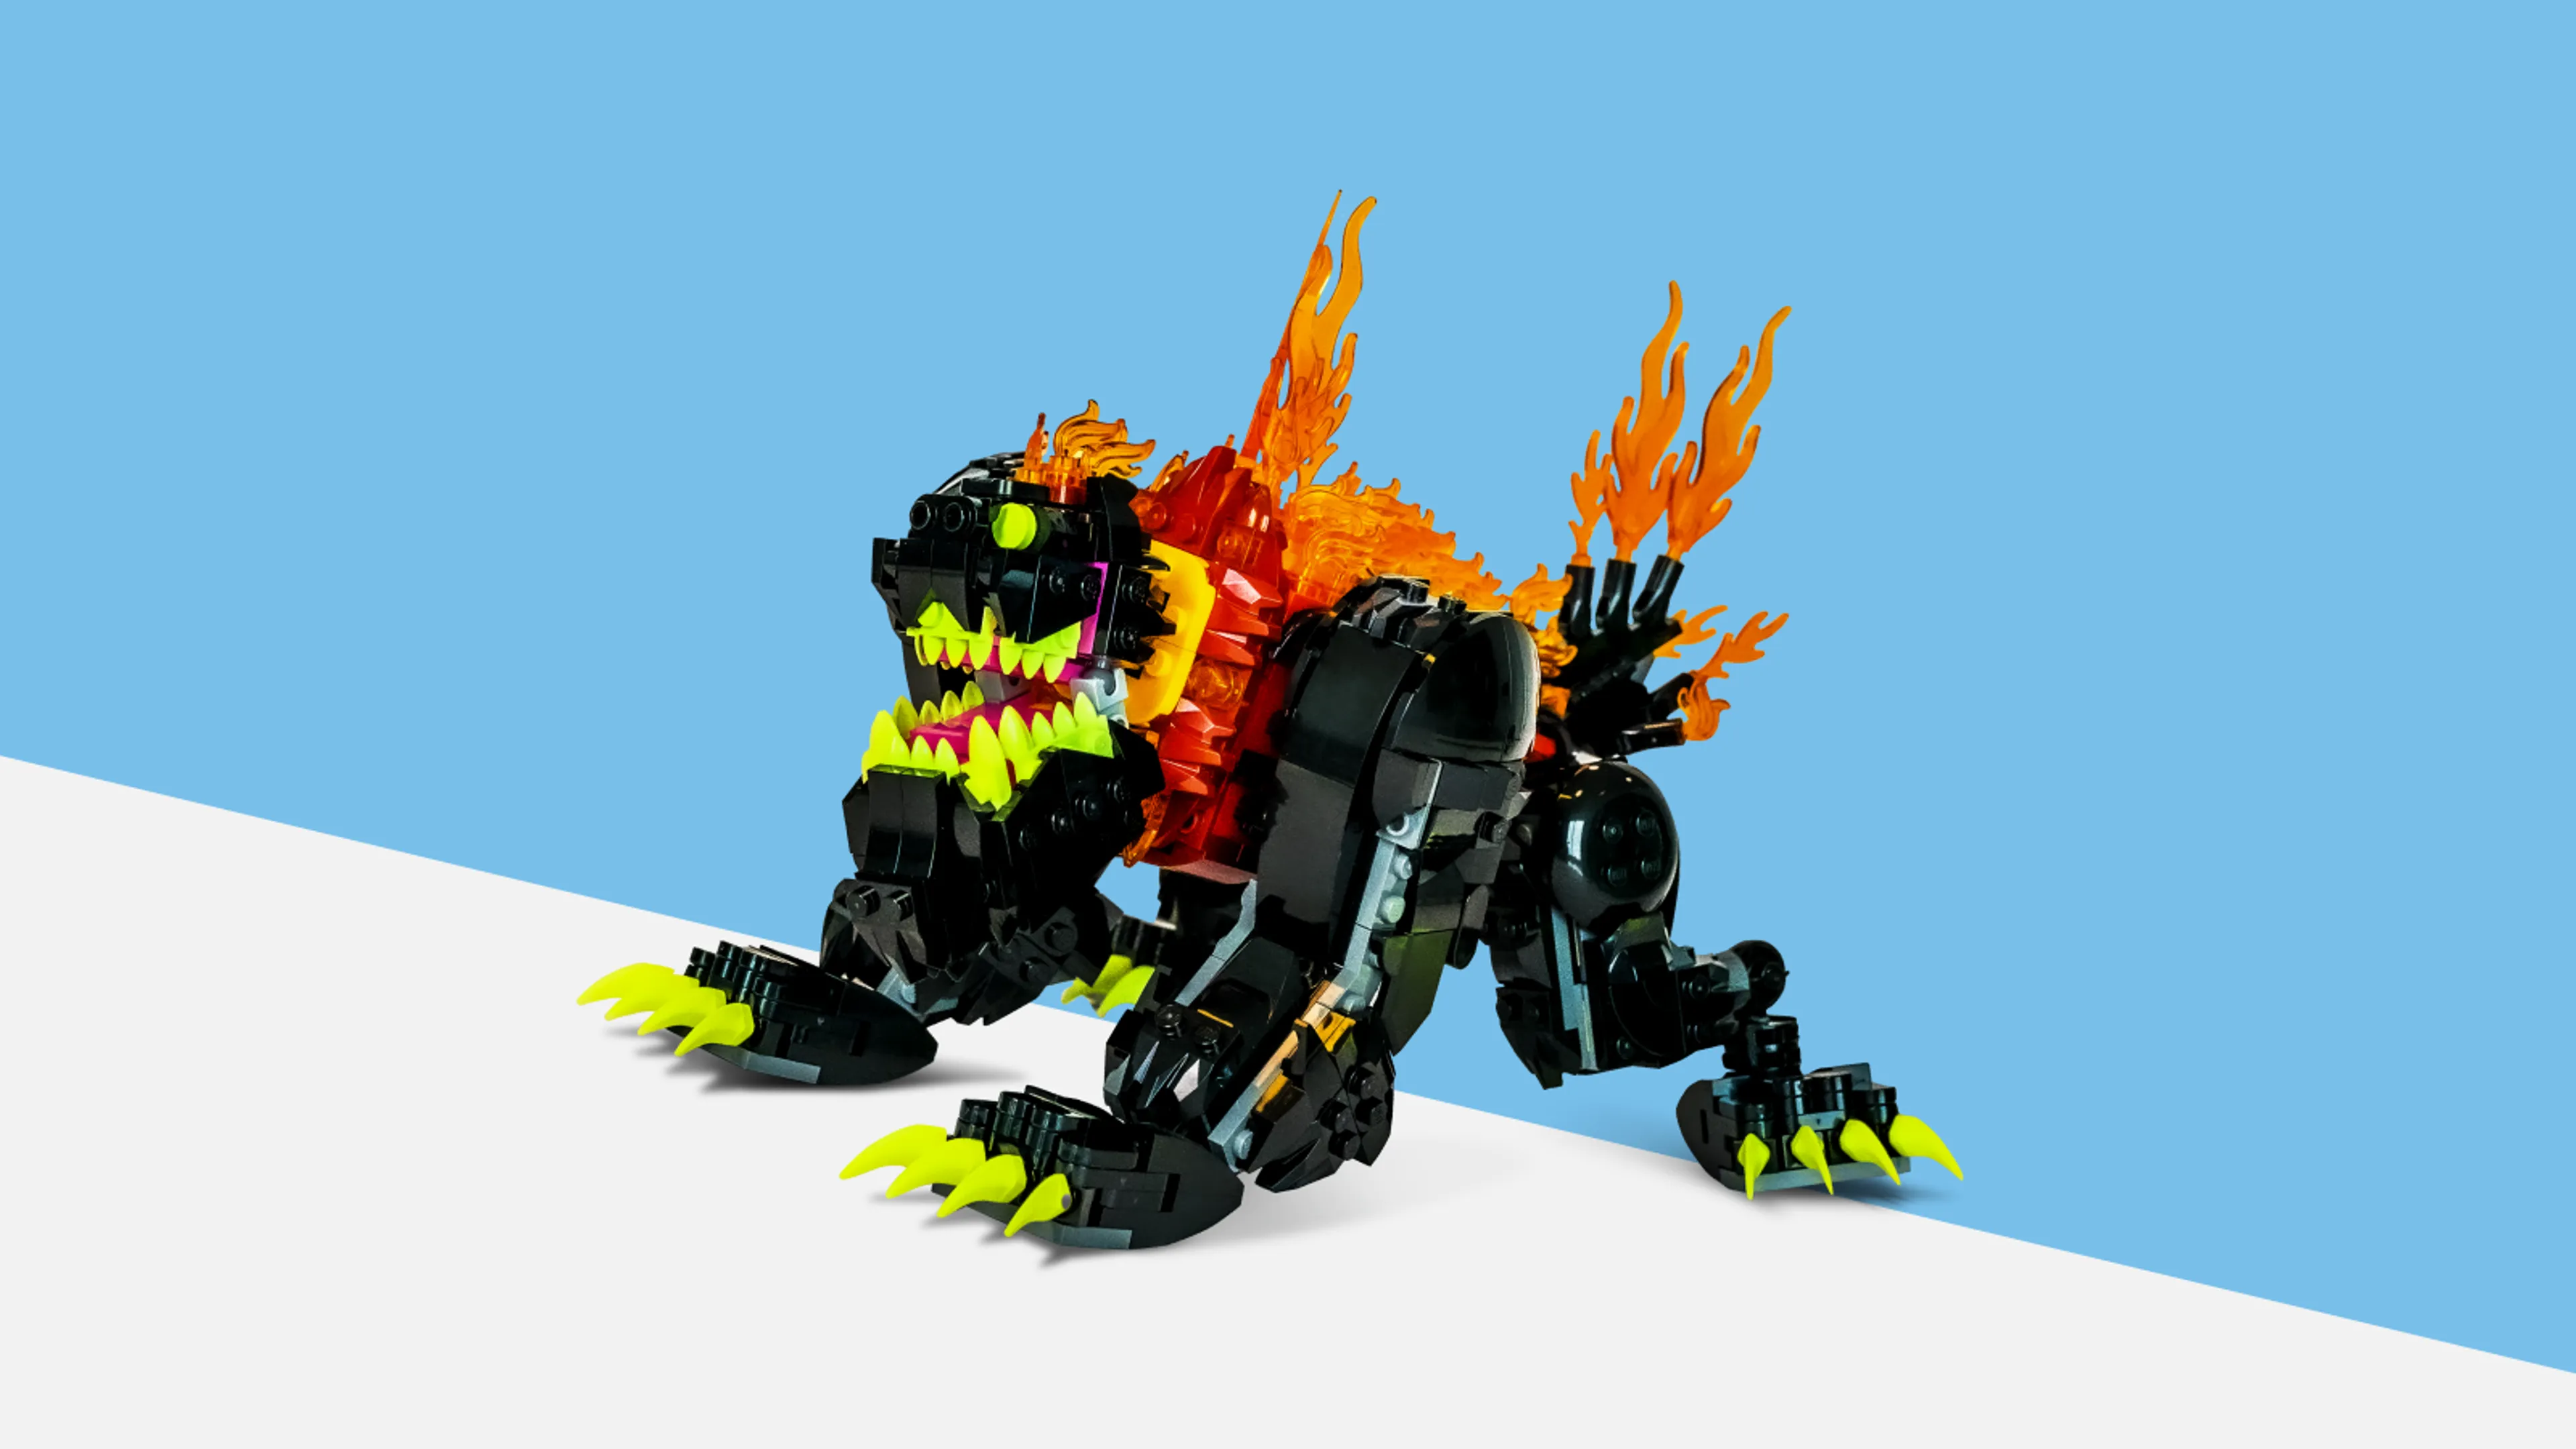 A LEGO monster